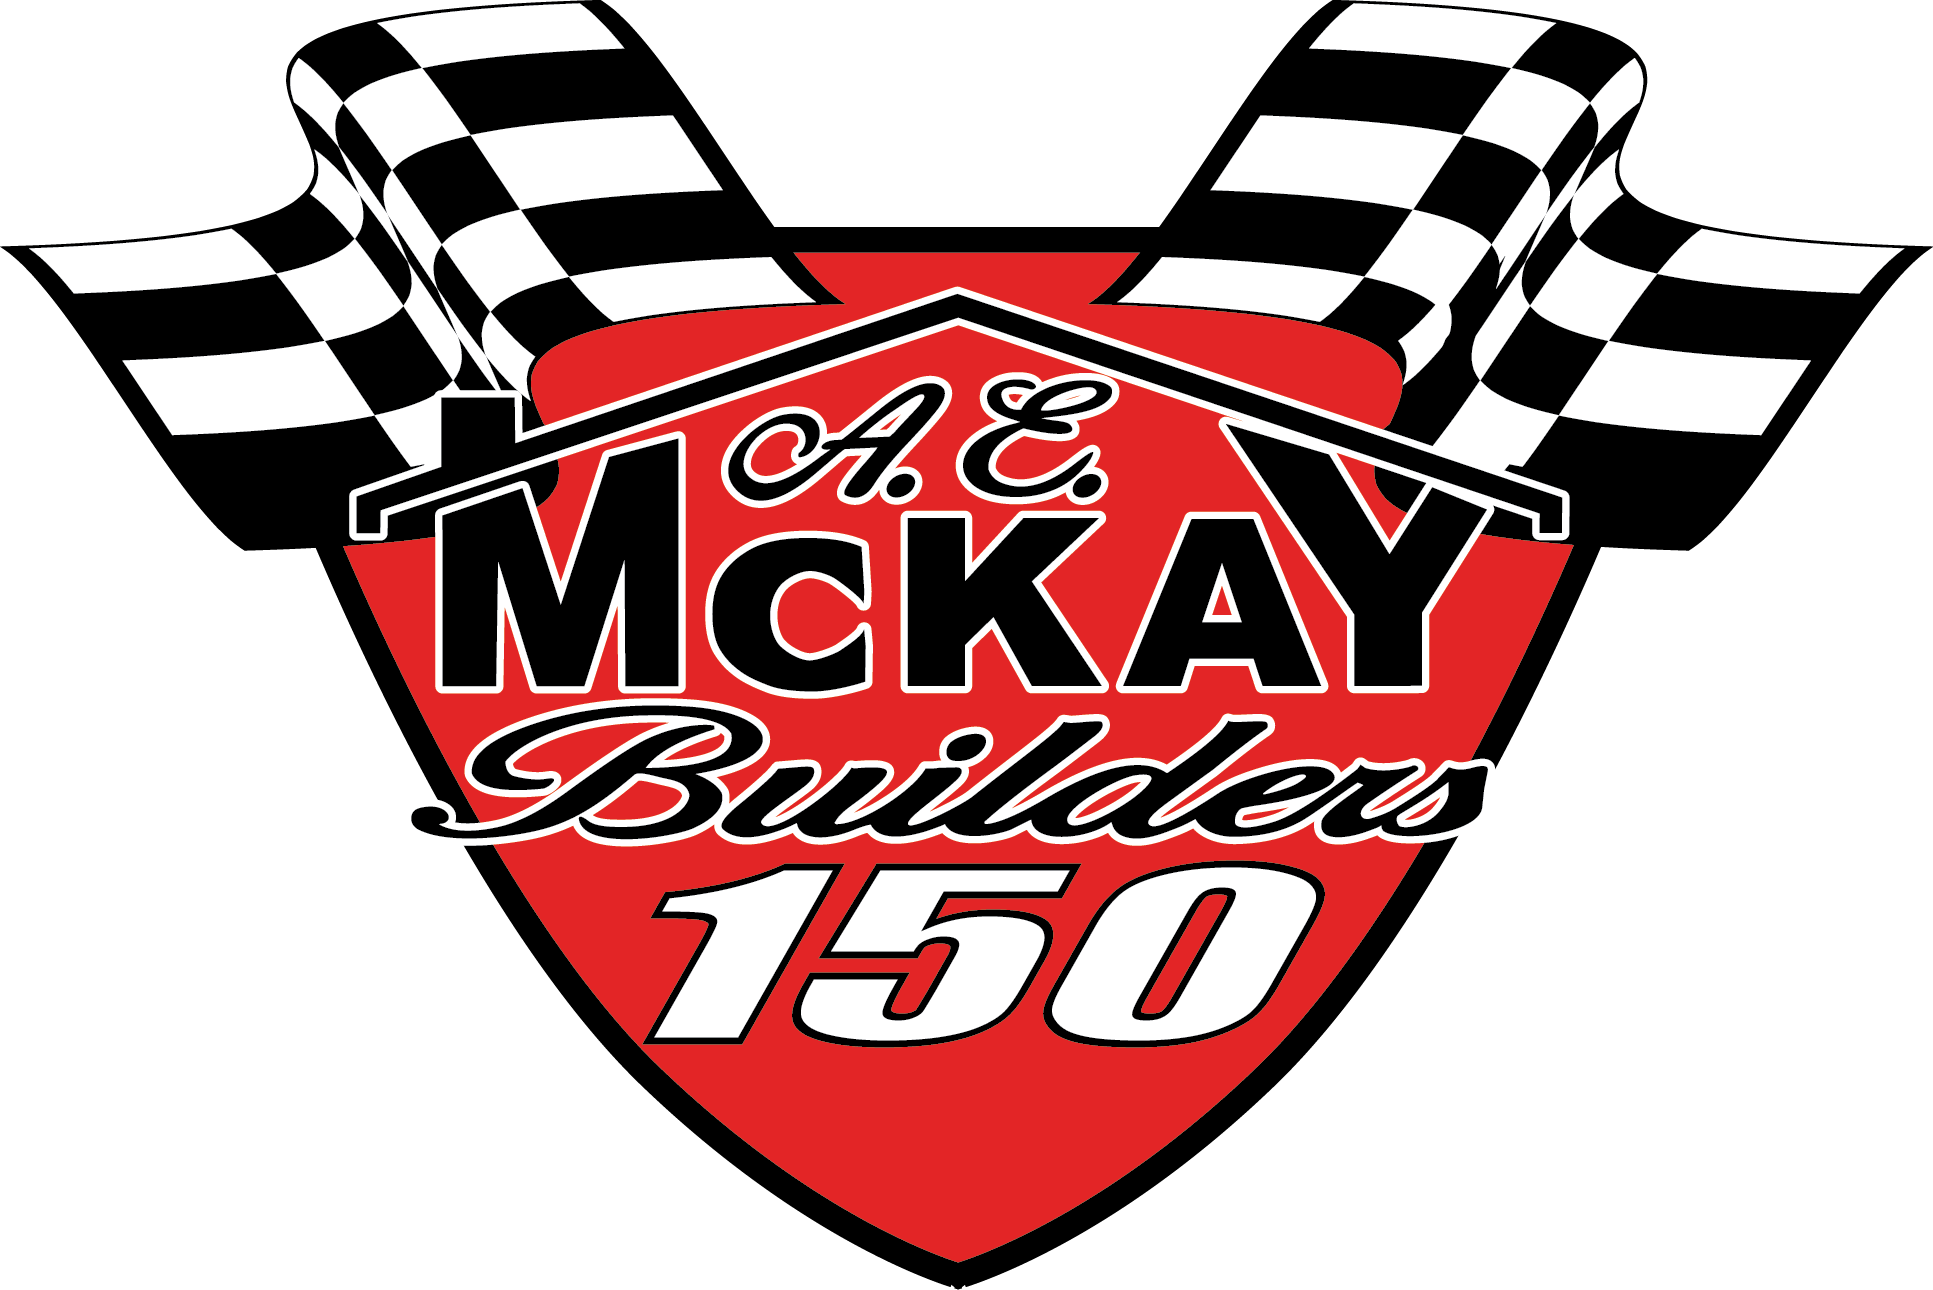 Speedweekend: A.E. McKay Builders to Present Sportsman Race, Monday Enduro Canceled